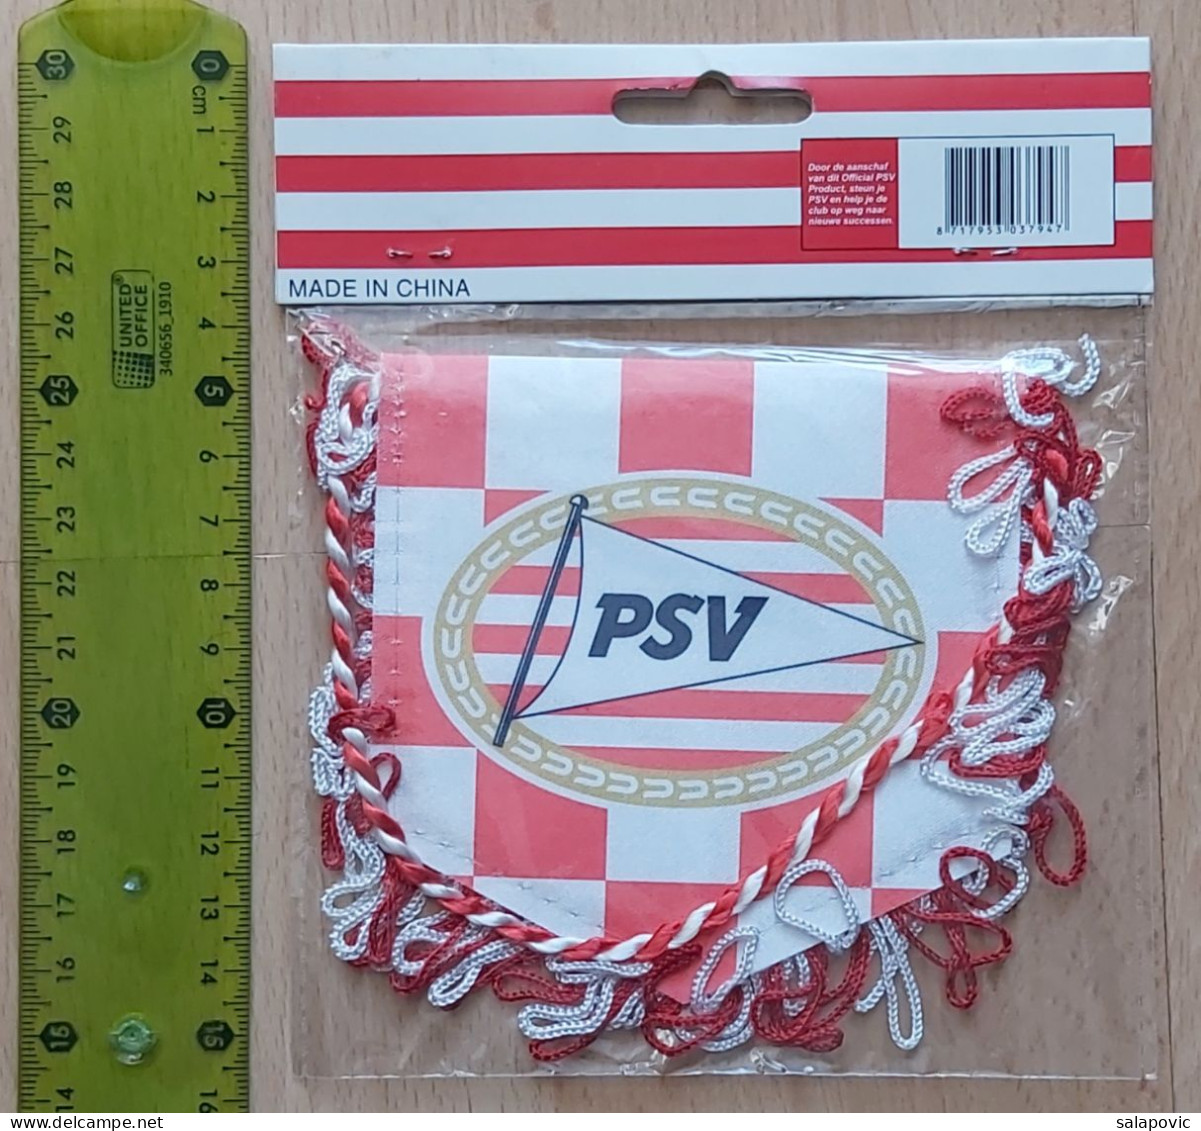 PSV Eindhoven Netherlands Football Club SOCCER, FUTBOL, CALCIO PENNANT, SPORTS FLAG ZS 3/18 - Apparel, Souvenirs & Other